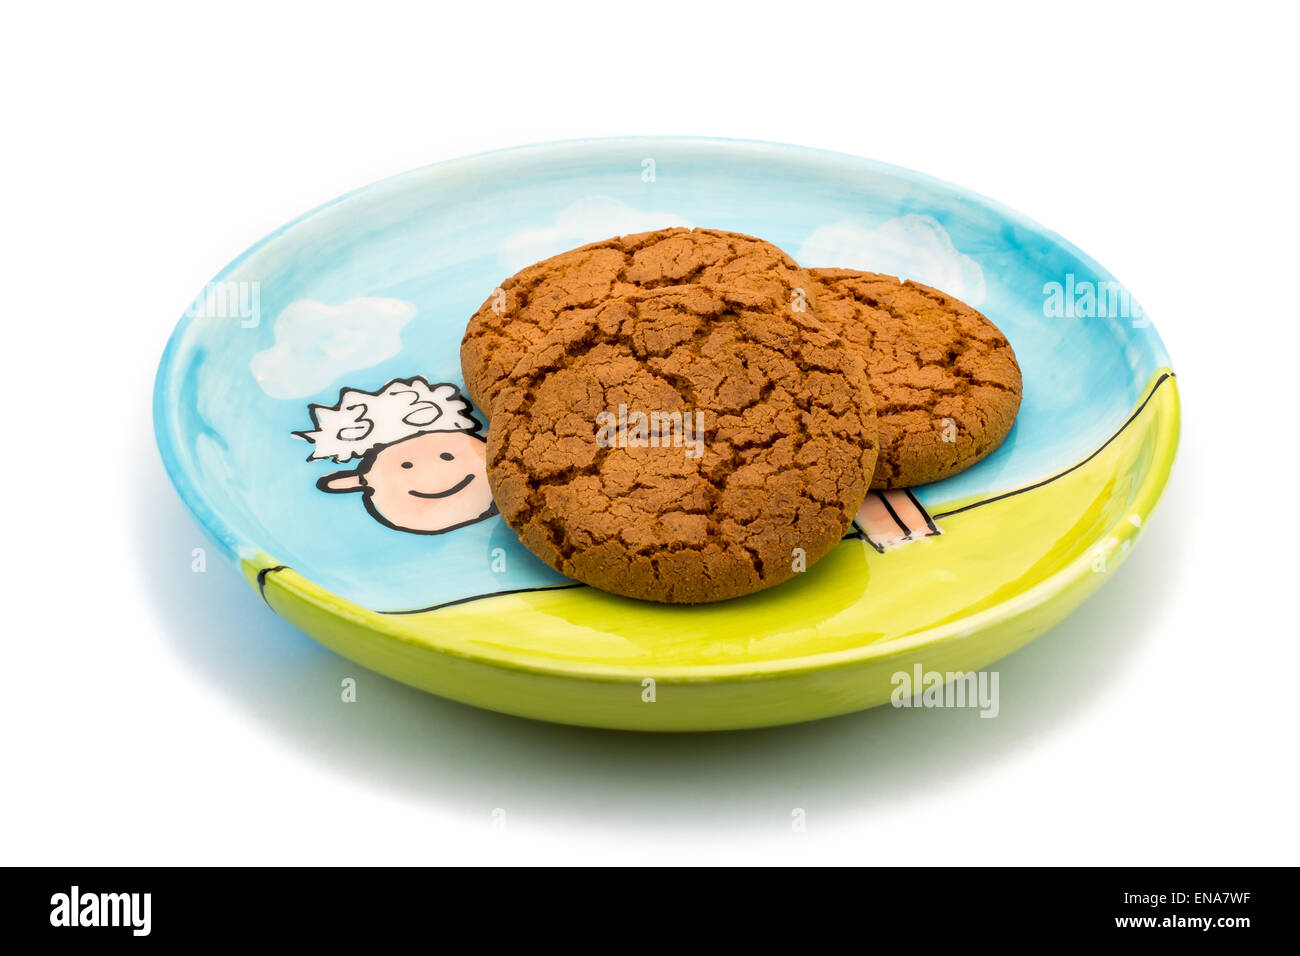 There is a smiling sheep underneath the cookies on a colorful plate. Image is isolated on a white background. Stock Photo